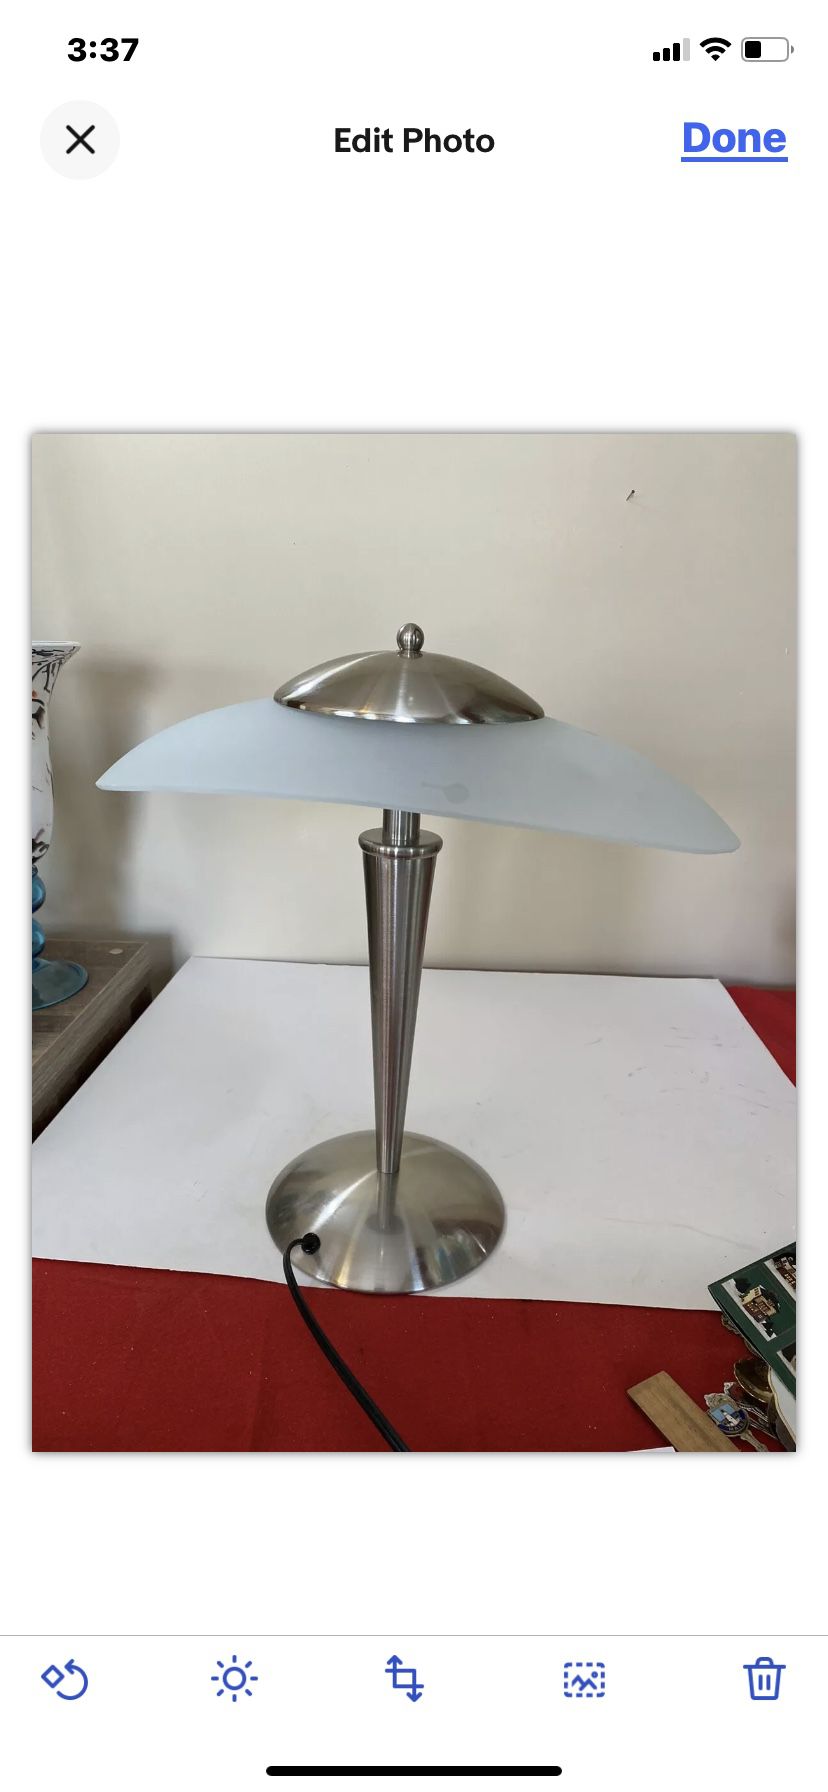 Art Deco Desk Table Lamp w Satin Nickel Base & Glass Shade. Works Perfectly